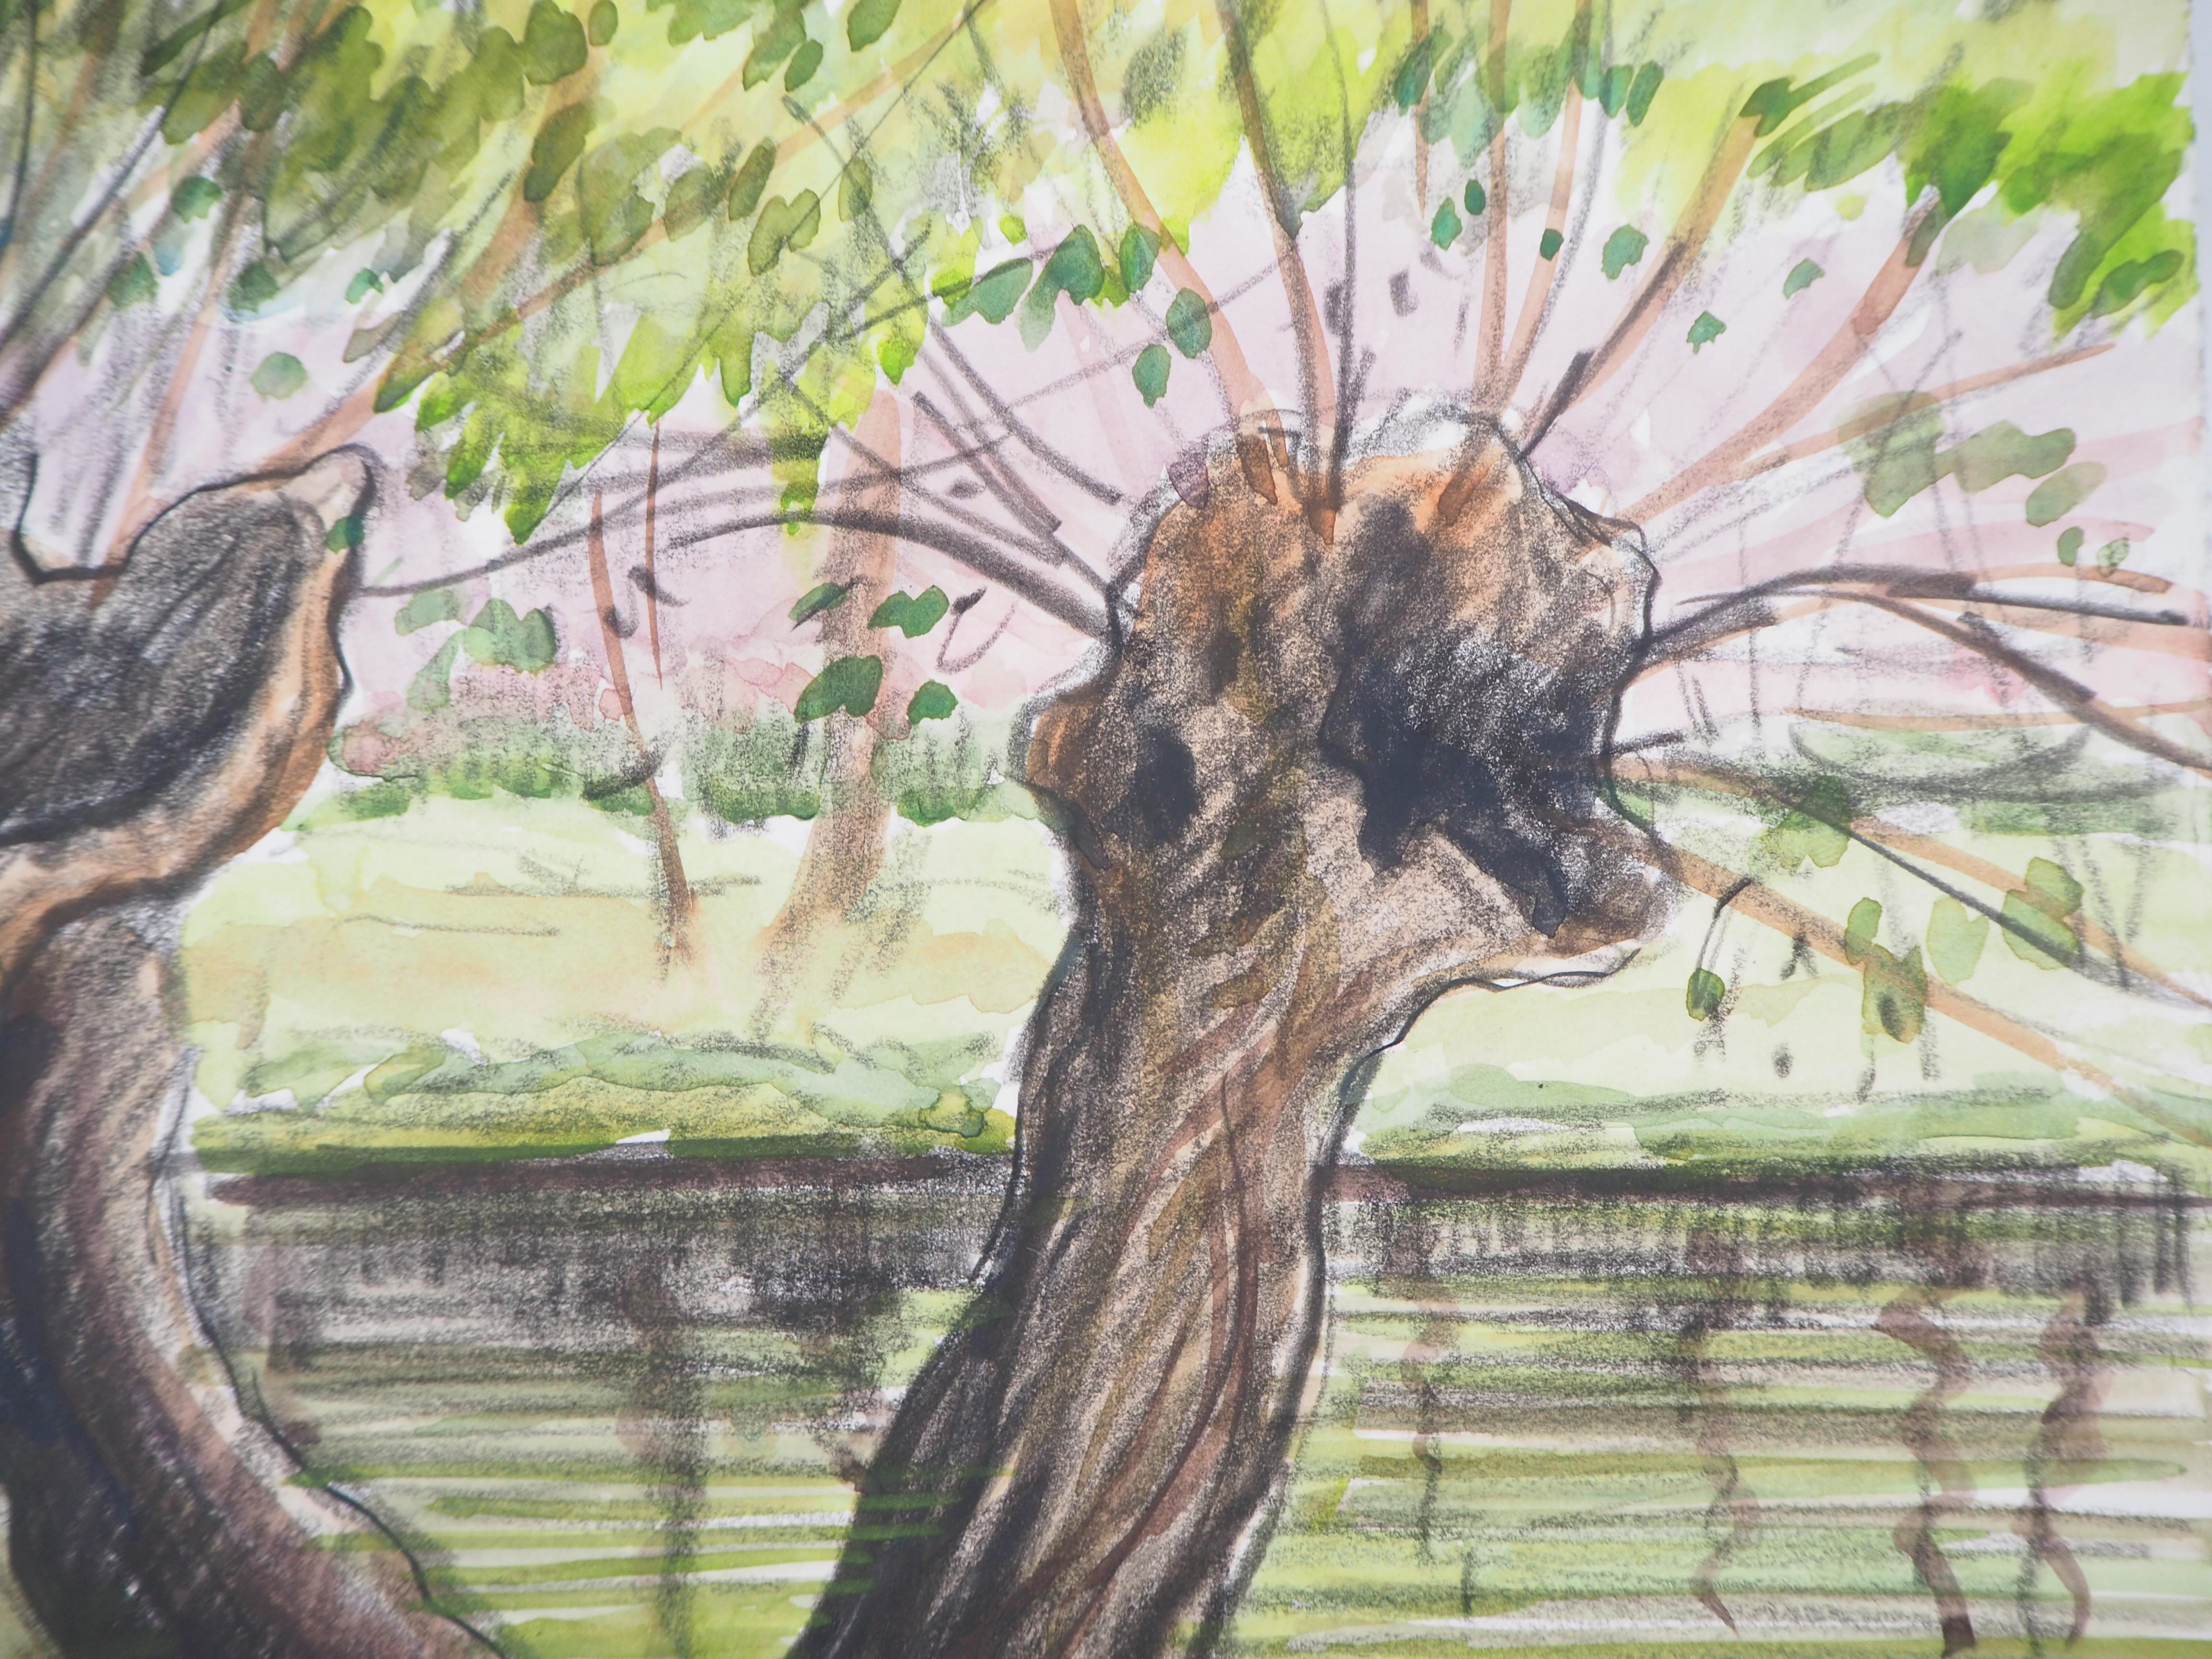 Old Trees near a Canal - Original watercolor painting - Signed - Beige Landscape Art by Paul Emile Pissarro